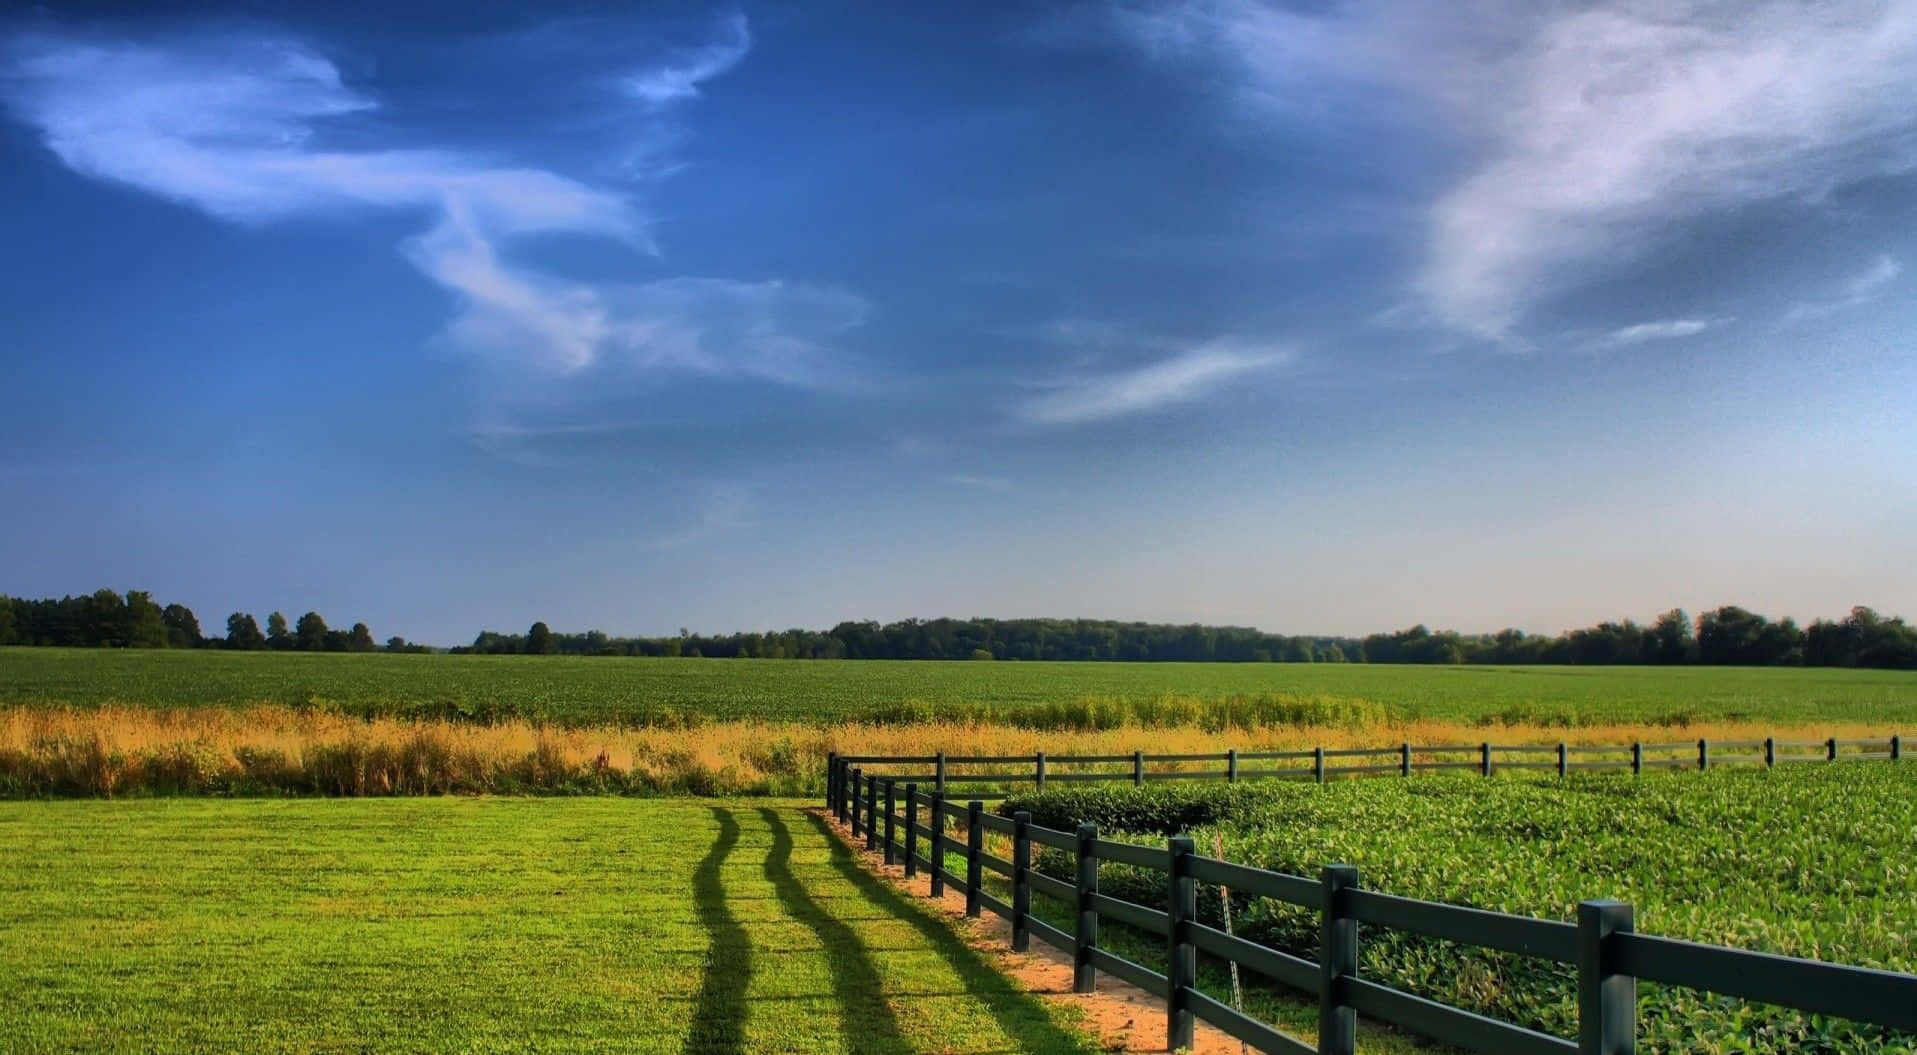 A Fence In The Field